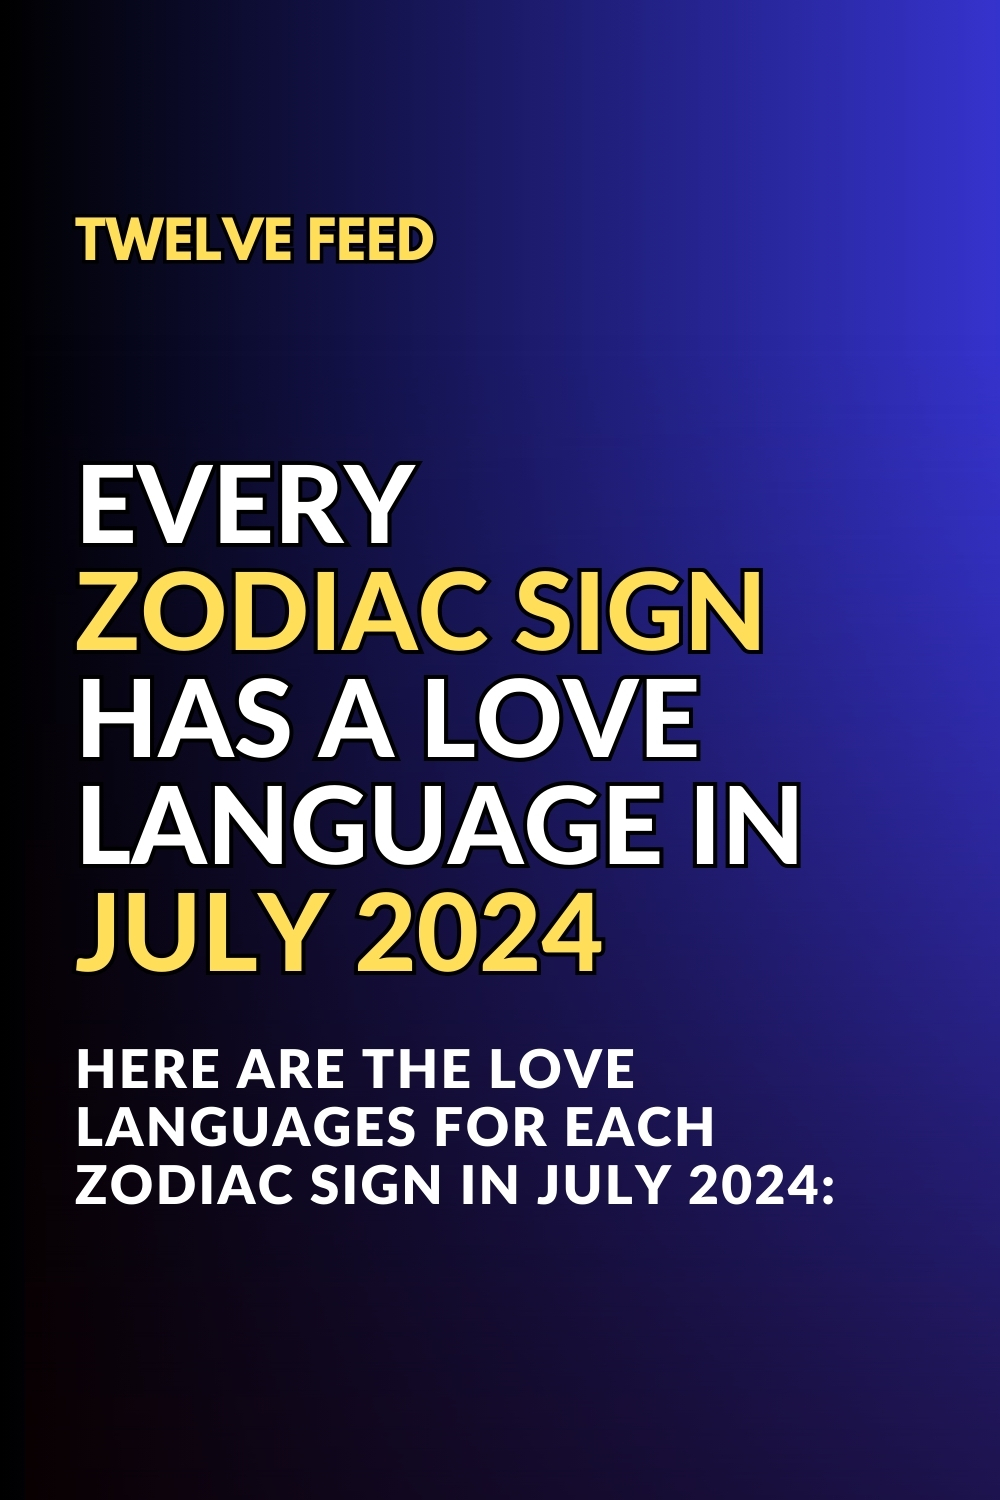 Every Zodiac Sign Has A Love Language In July 2024